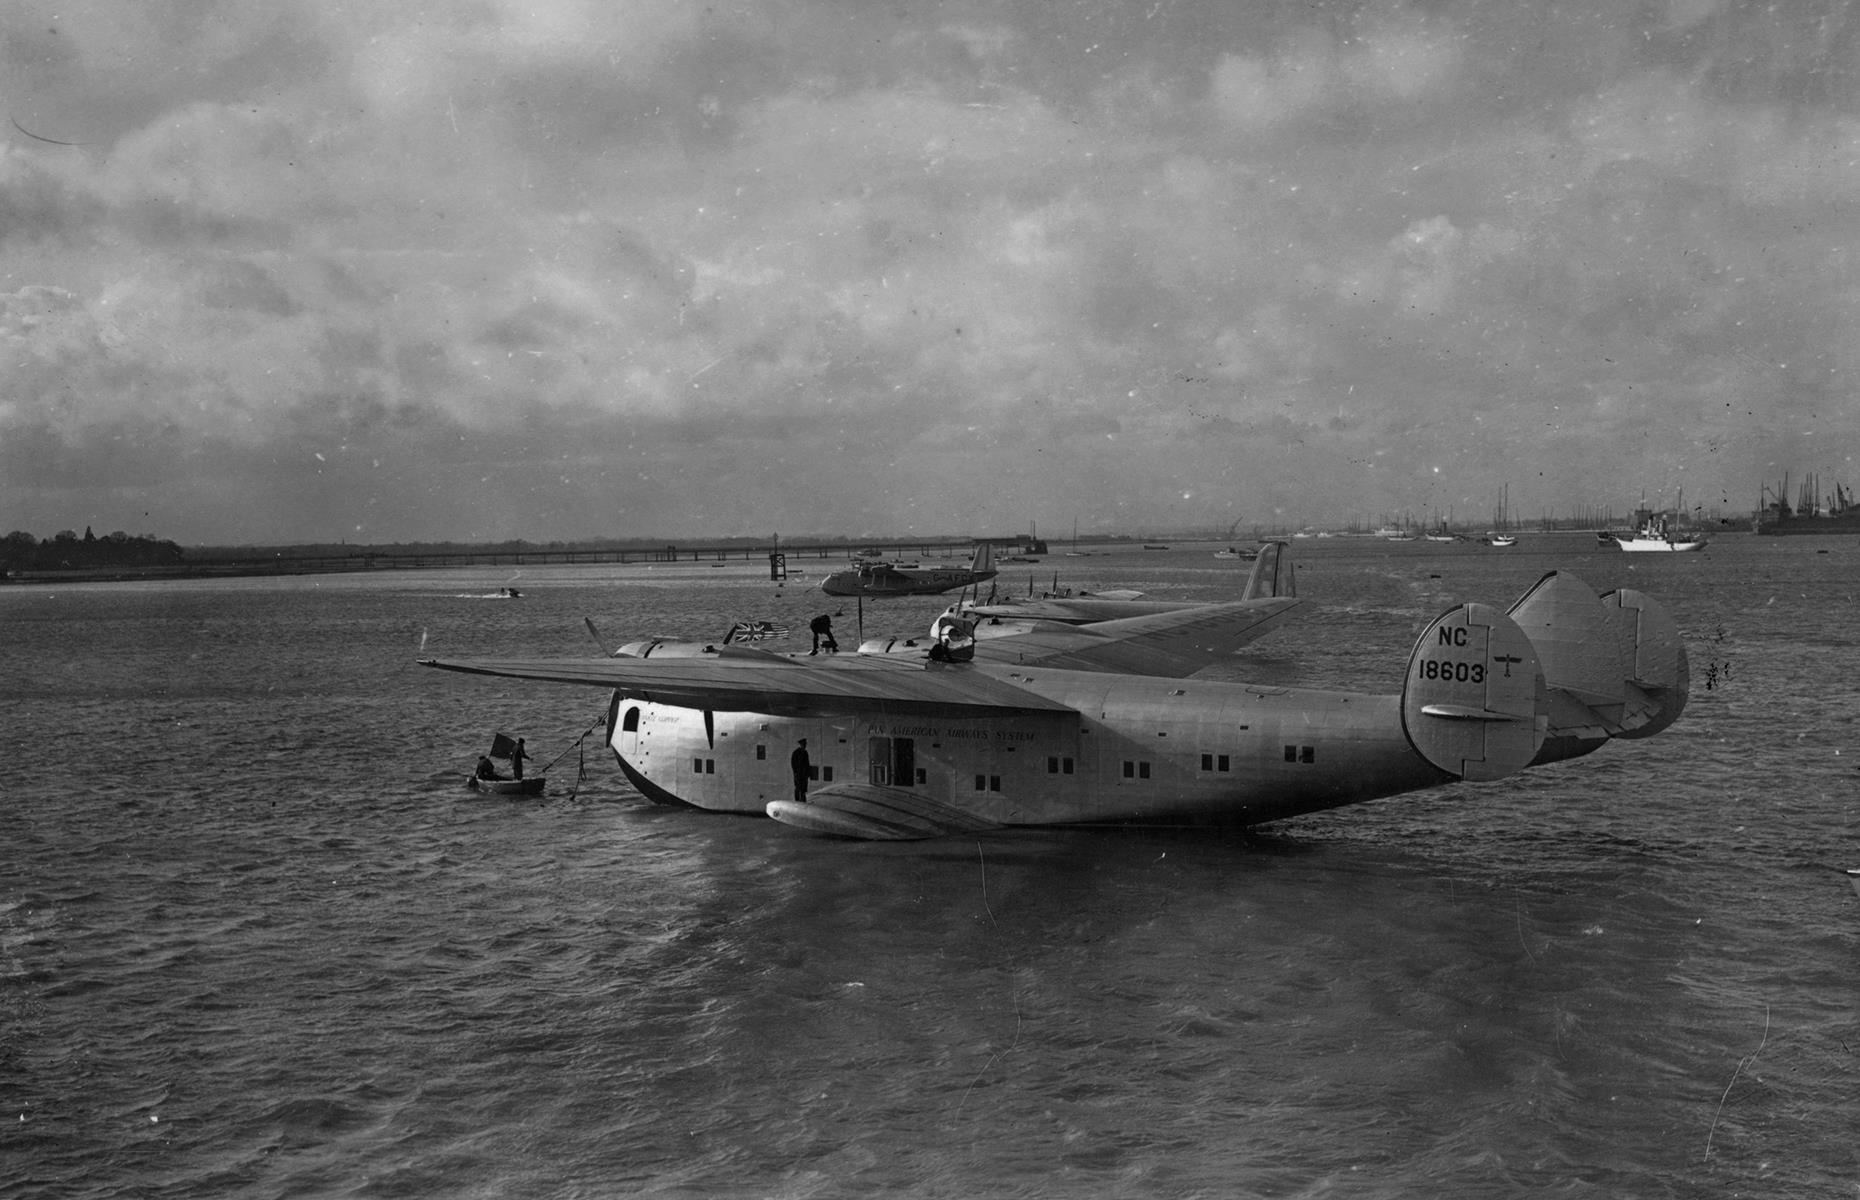 Slide 13 of 51: The 1930s also saw some of the earliest commercial flights across the Atlantic. Pan American Airways was one of the forerunners, transporting 21 passengers across the Atlantic in 1939. The Yankee Clipper aircraft or "flying boat", which undertook this journey, is pictured here in Calshot, Southampton, UK after the flight.